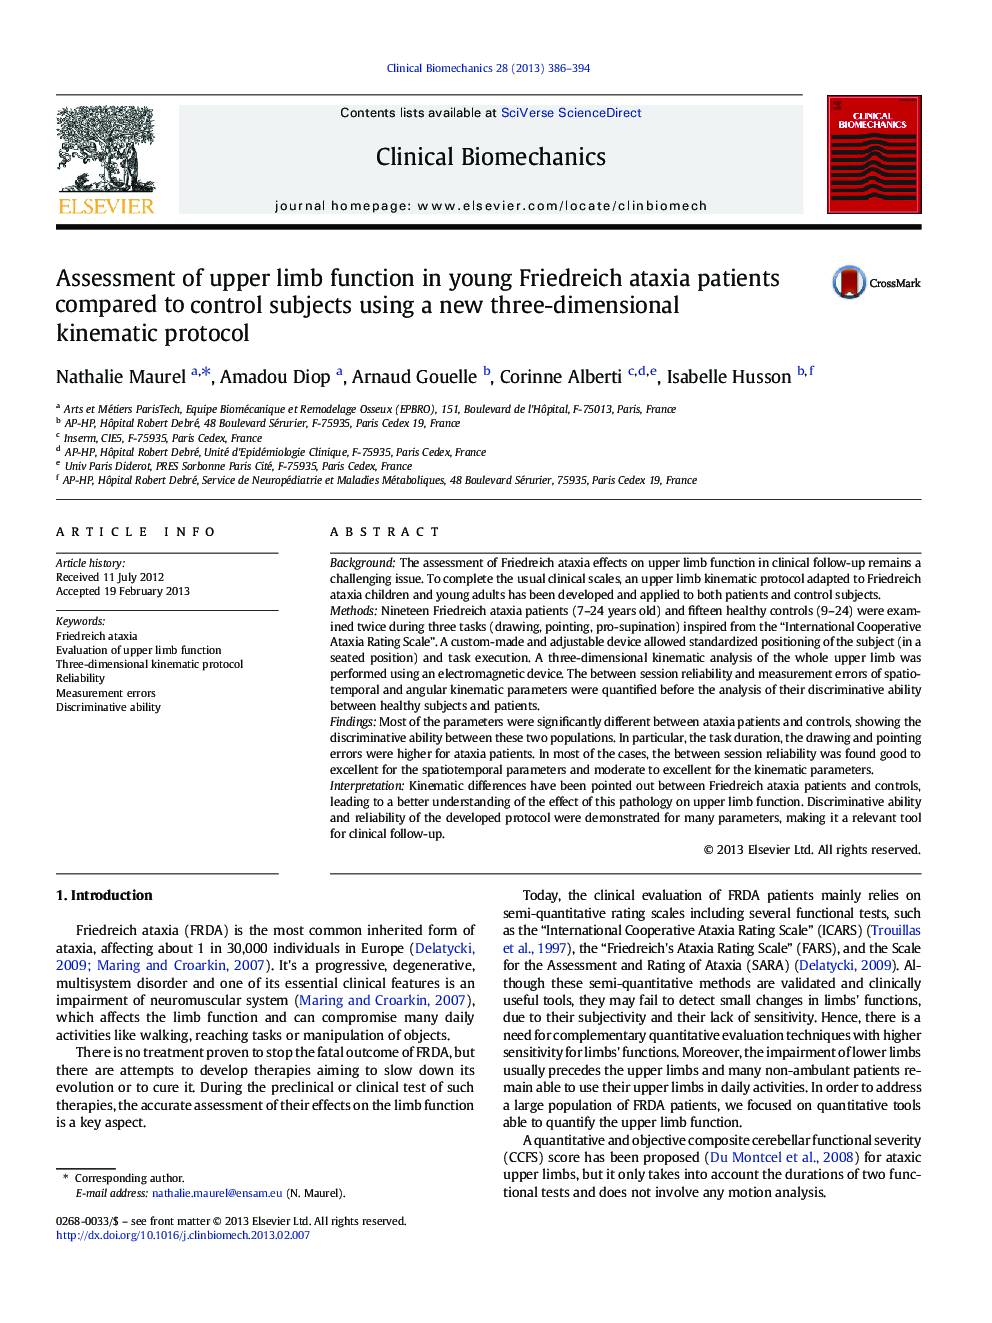 Assessment of upper limb function in young Friedreich ataxia patients compared to control subjects using a new three-dimensional kinematic protocol